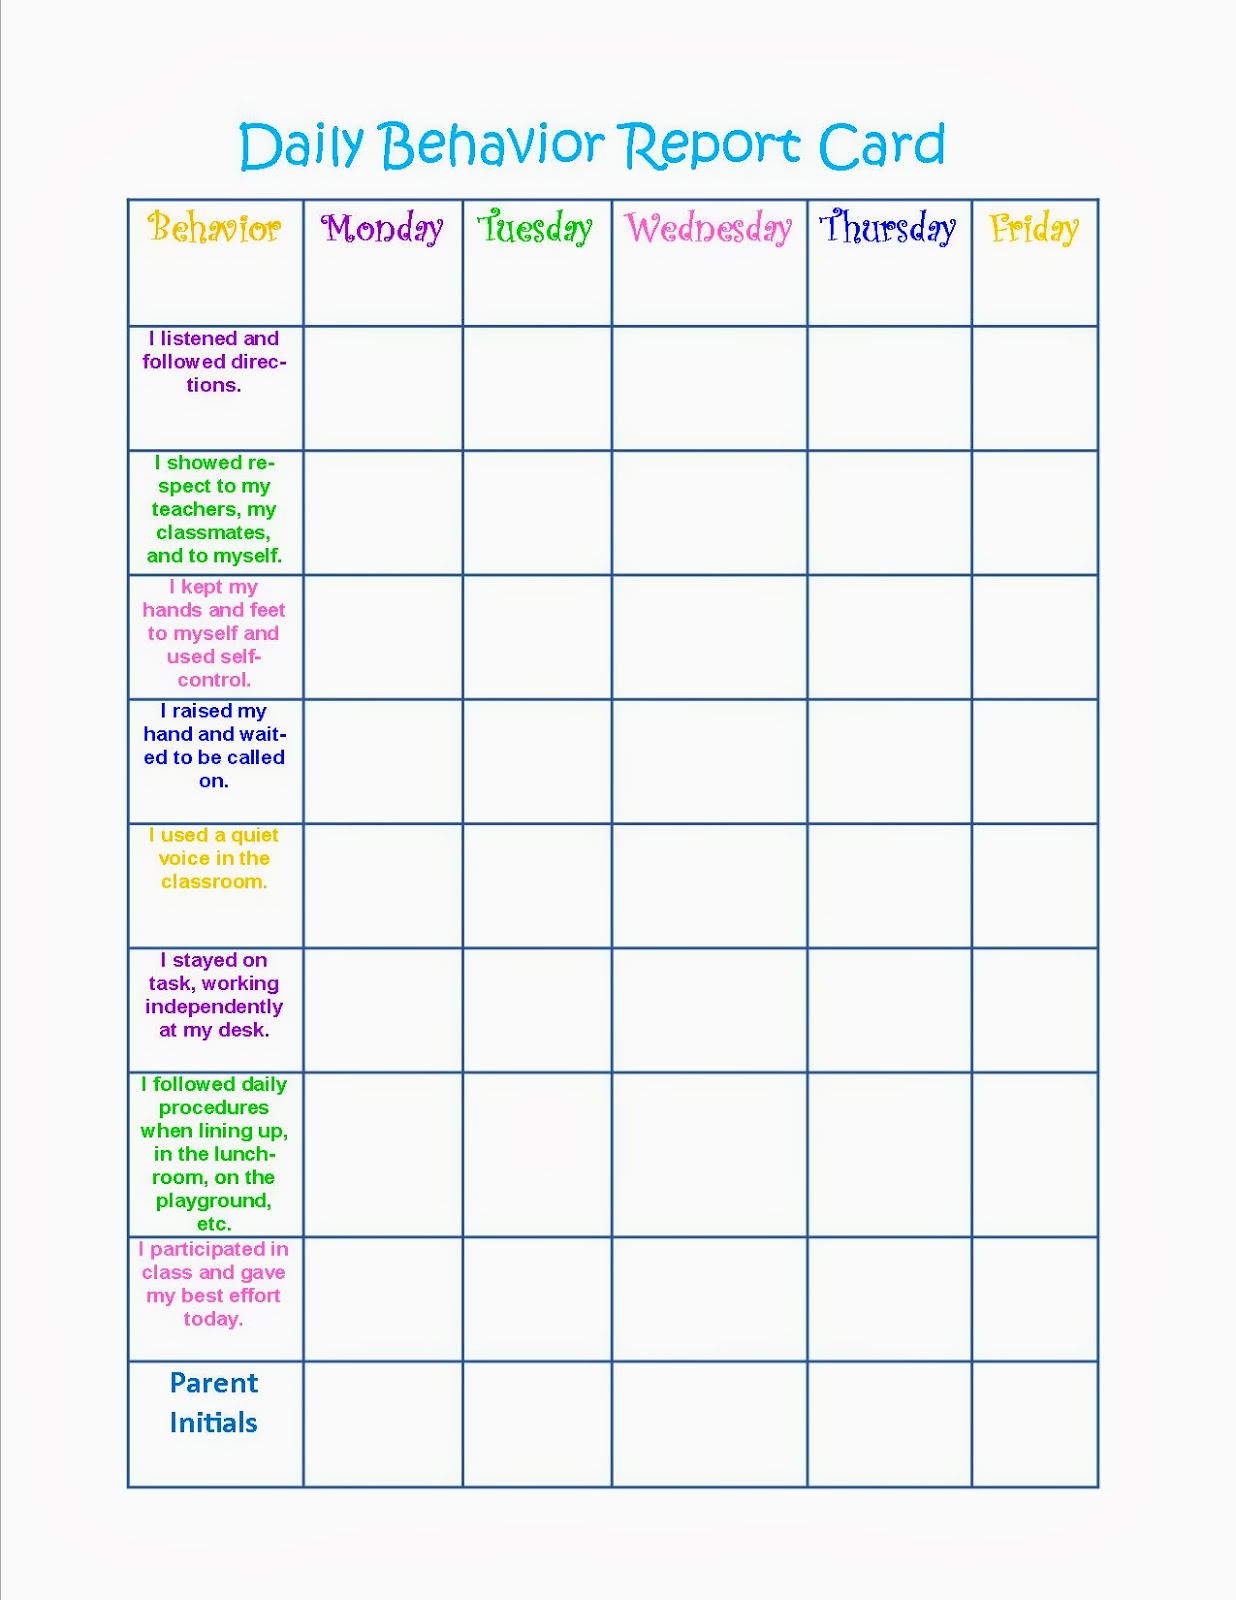 daily-behavior-chart-search-results-calendar-2015